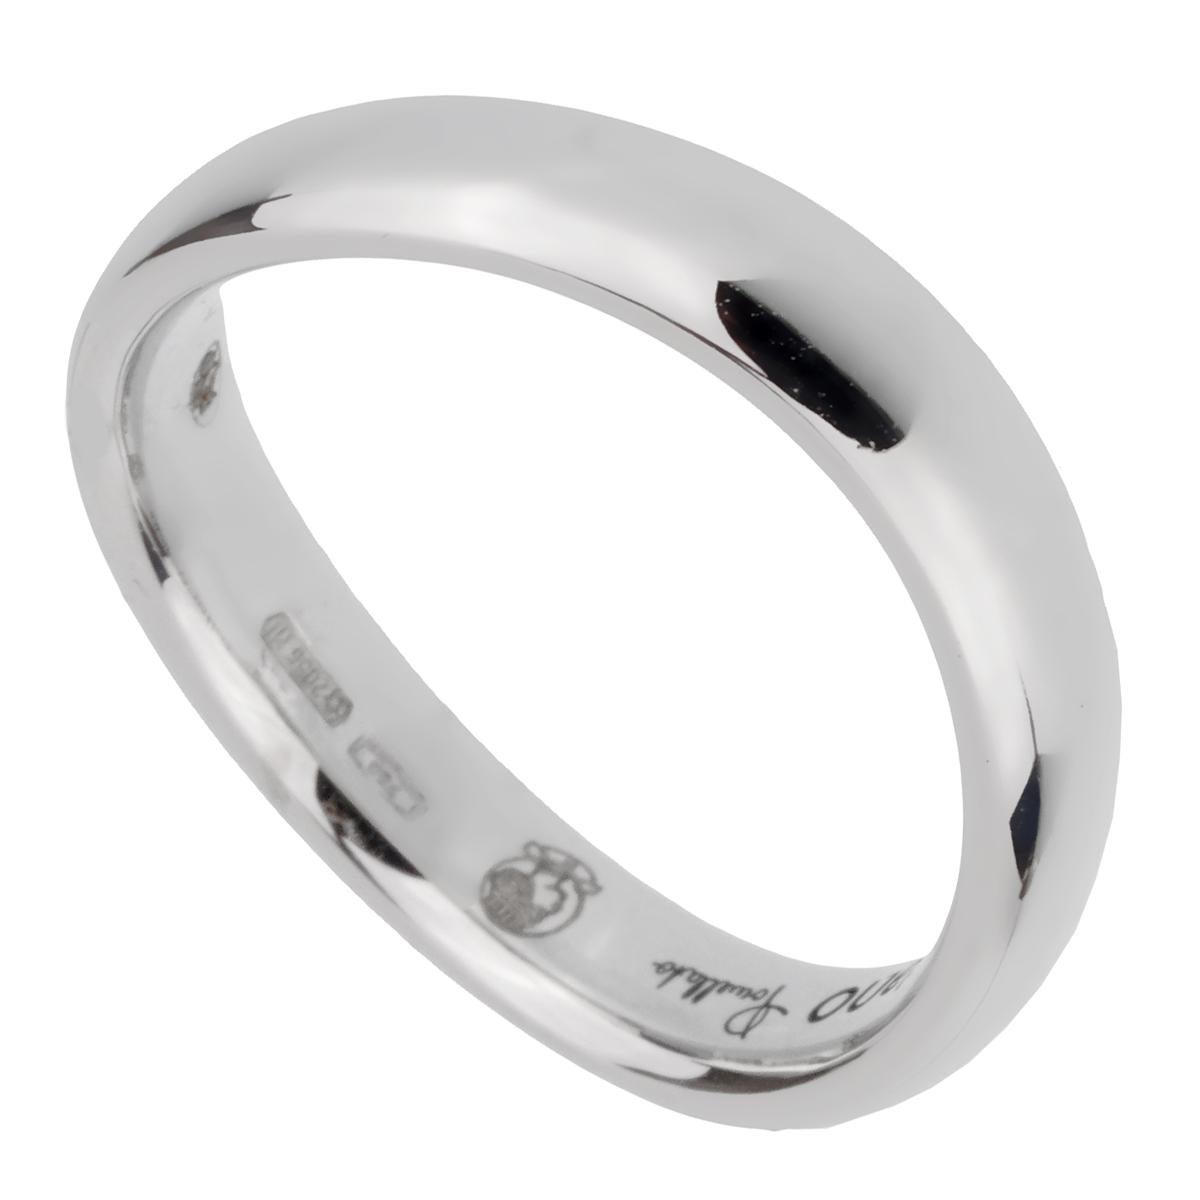 A chic Pomellato wave style band crafted in 18k white gold, the ring measures a size 5 and can be resized.

Pomellato Retail Price: $1350
Sku: 2404